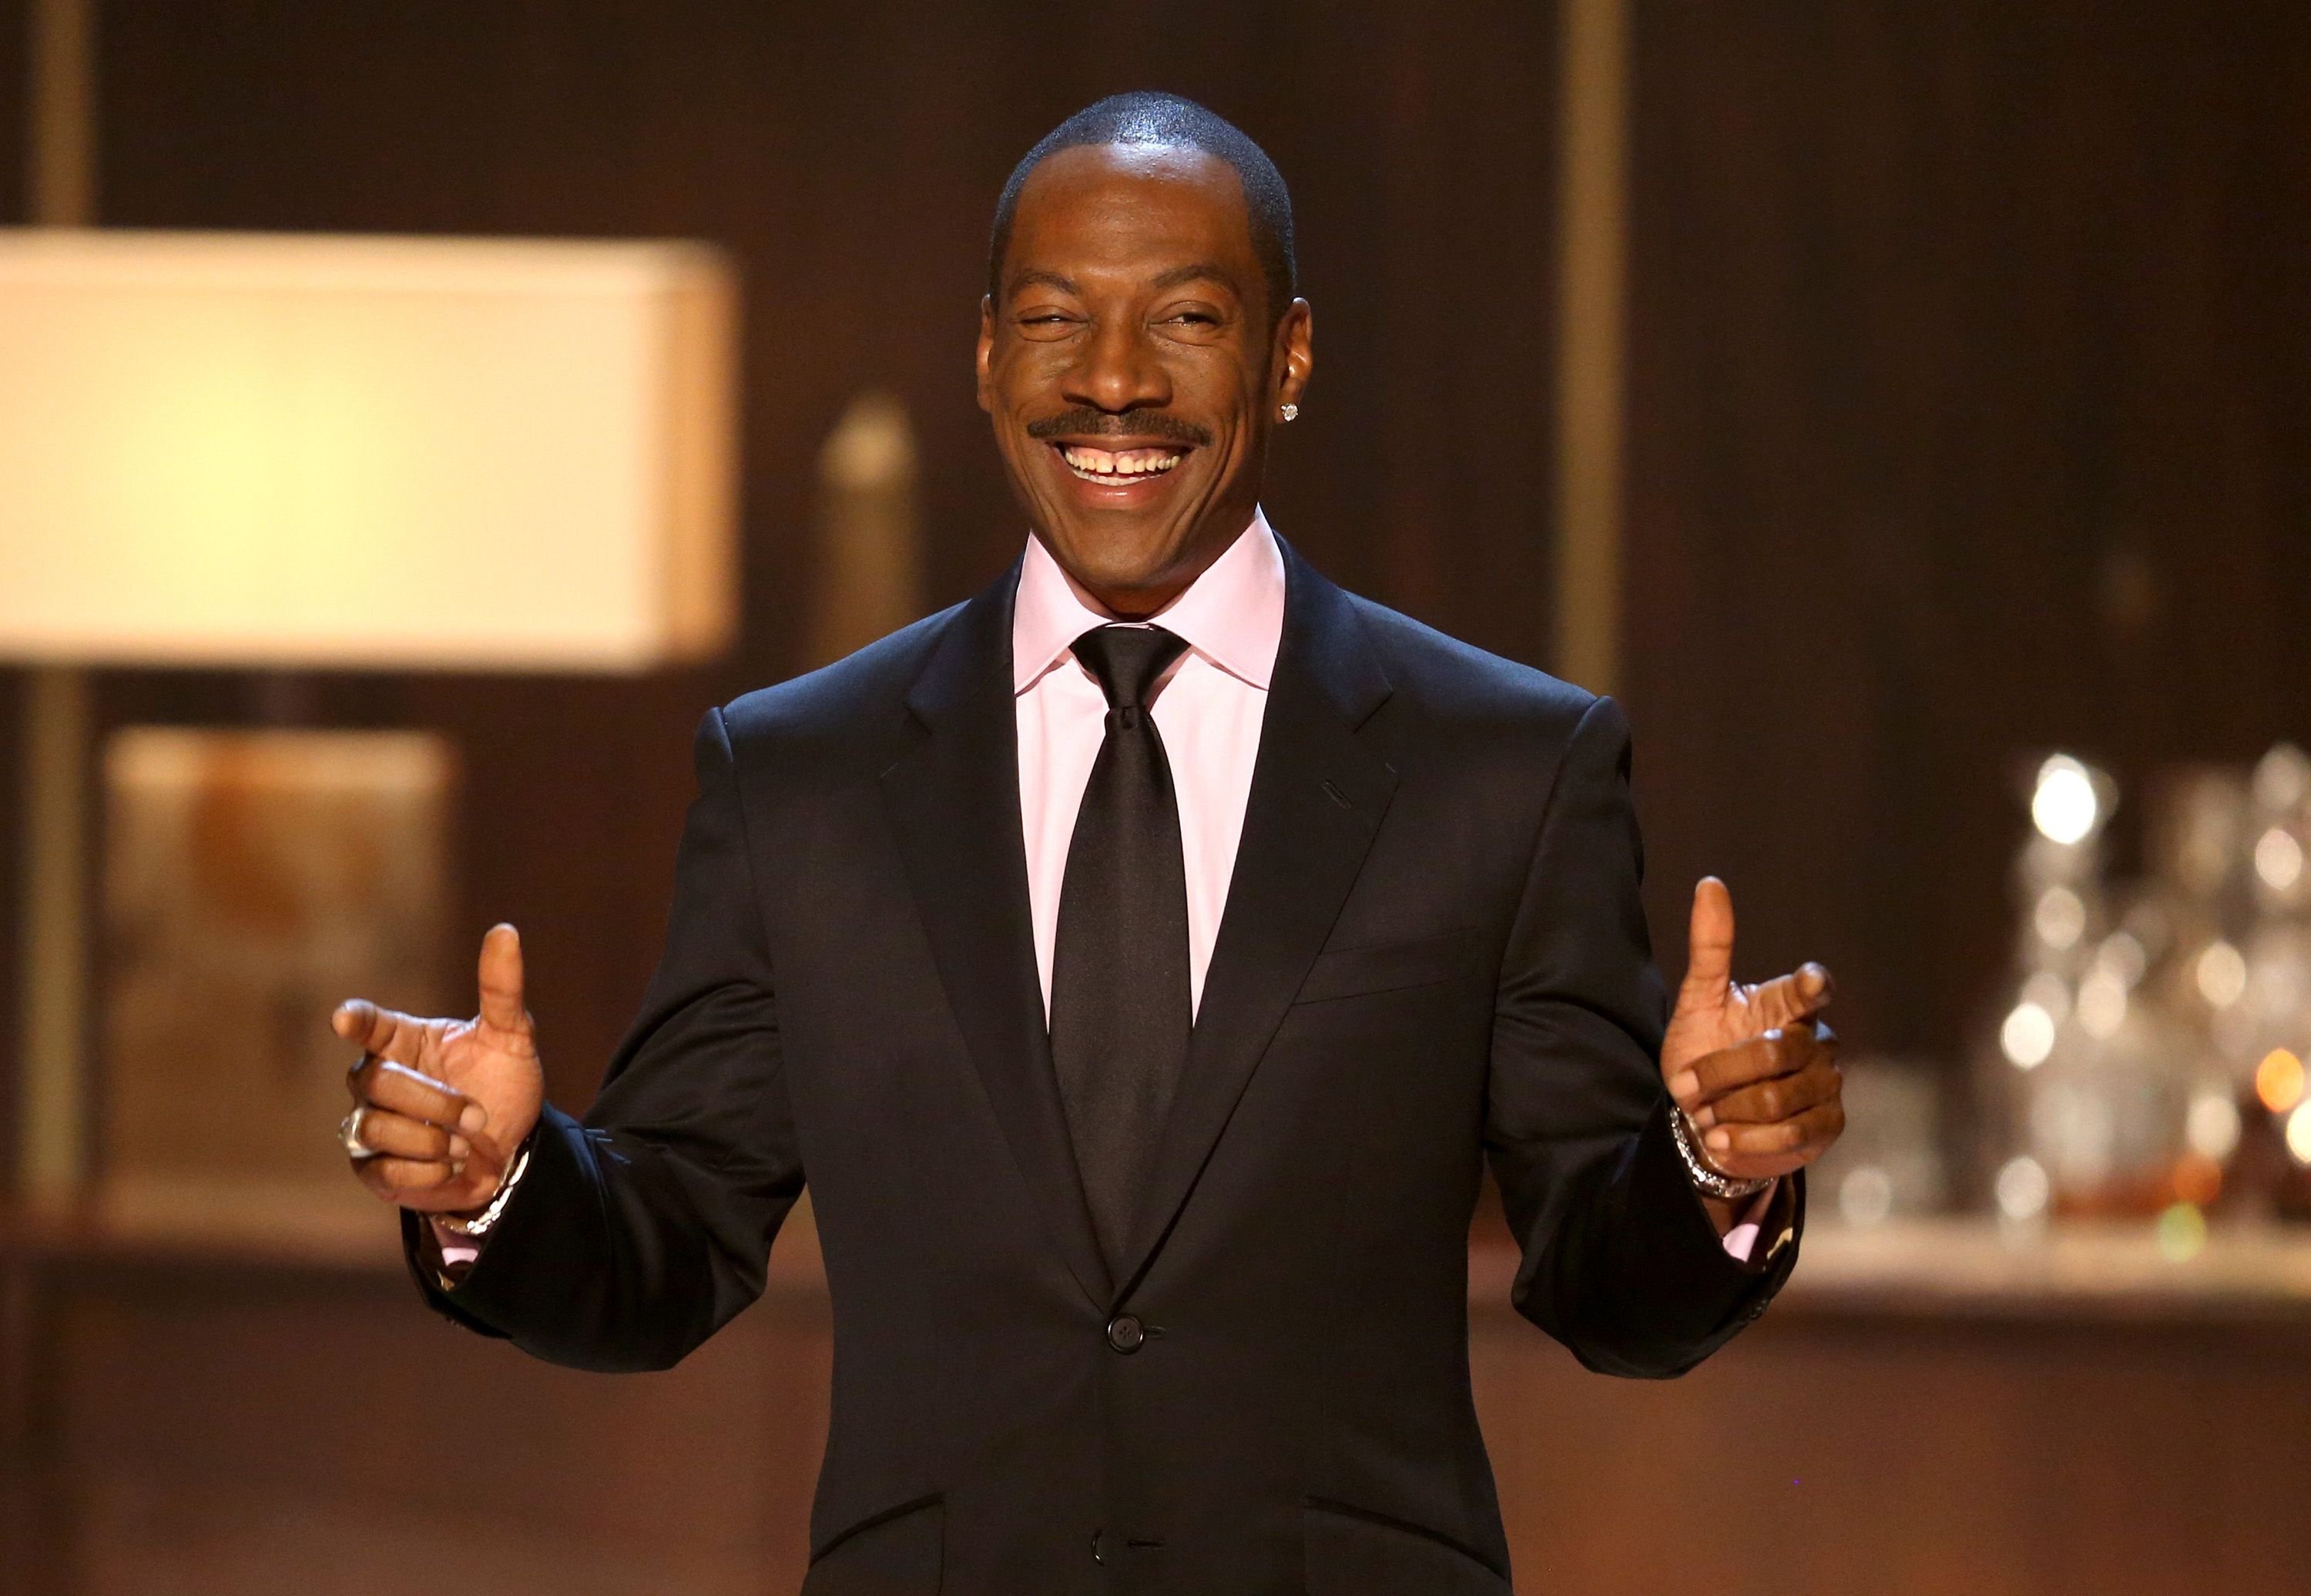 Eddie Murphy onstage for the Spike TV's "Eddie Murphy: One Night Only" at the Saban Theatre on November 3, 2012. | Photo: Getty Images